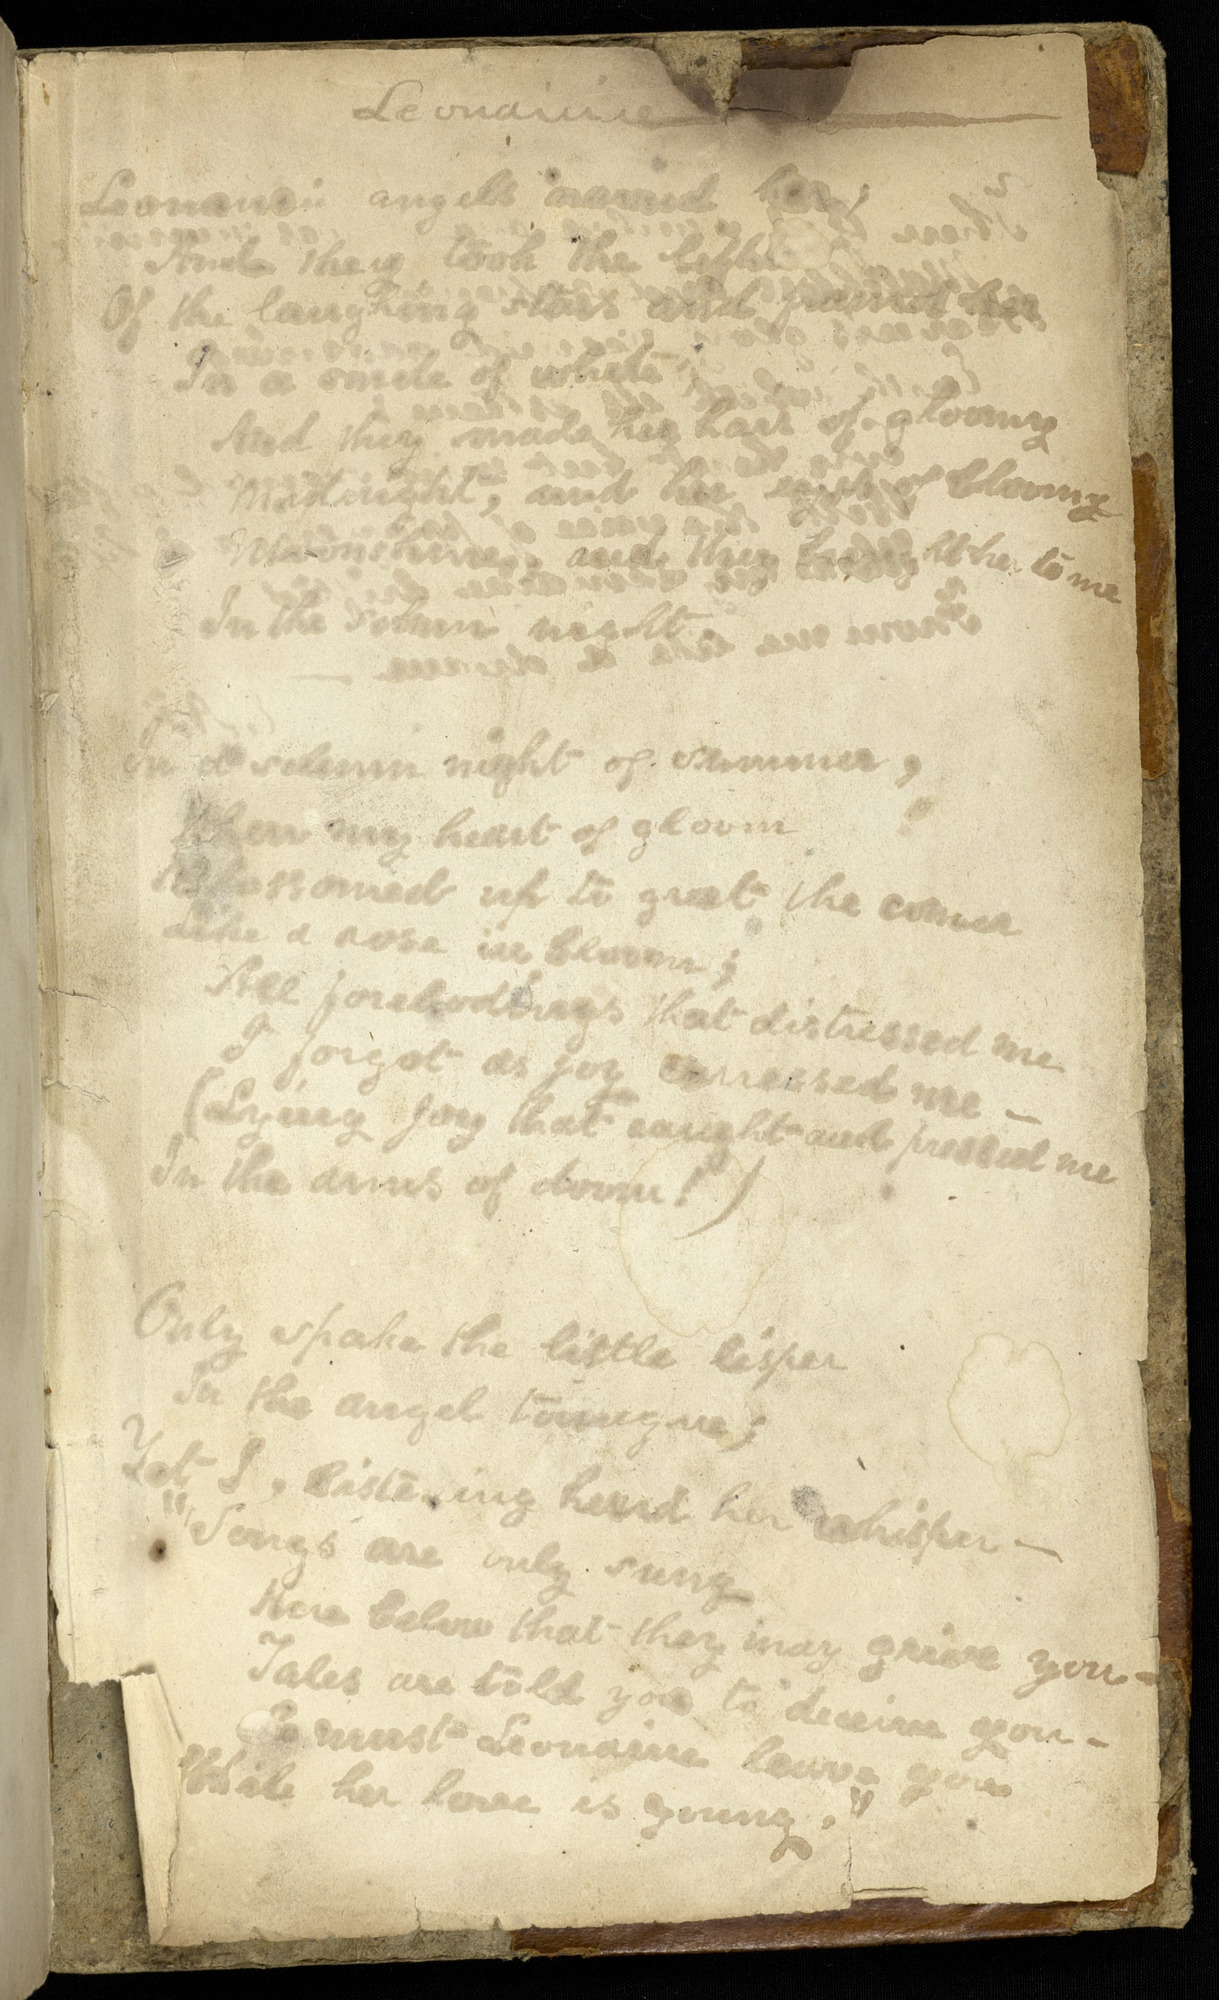  “Leonainie,” written on back flyleaf of An Abridgmentof Ainsworth’s Dictionary, English and Latin,ca. 1850.